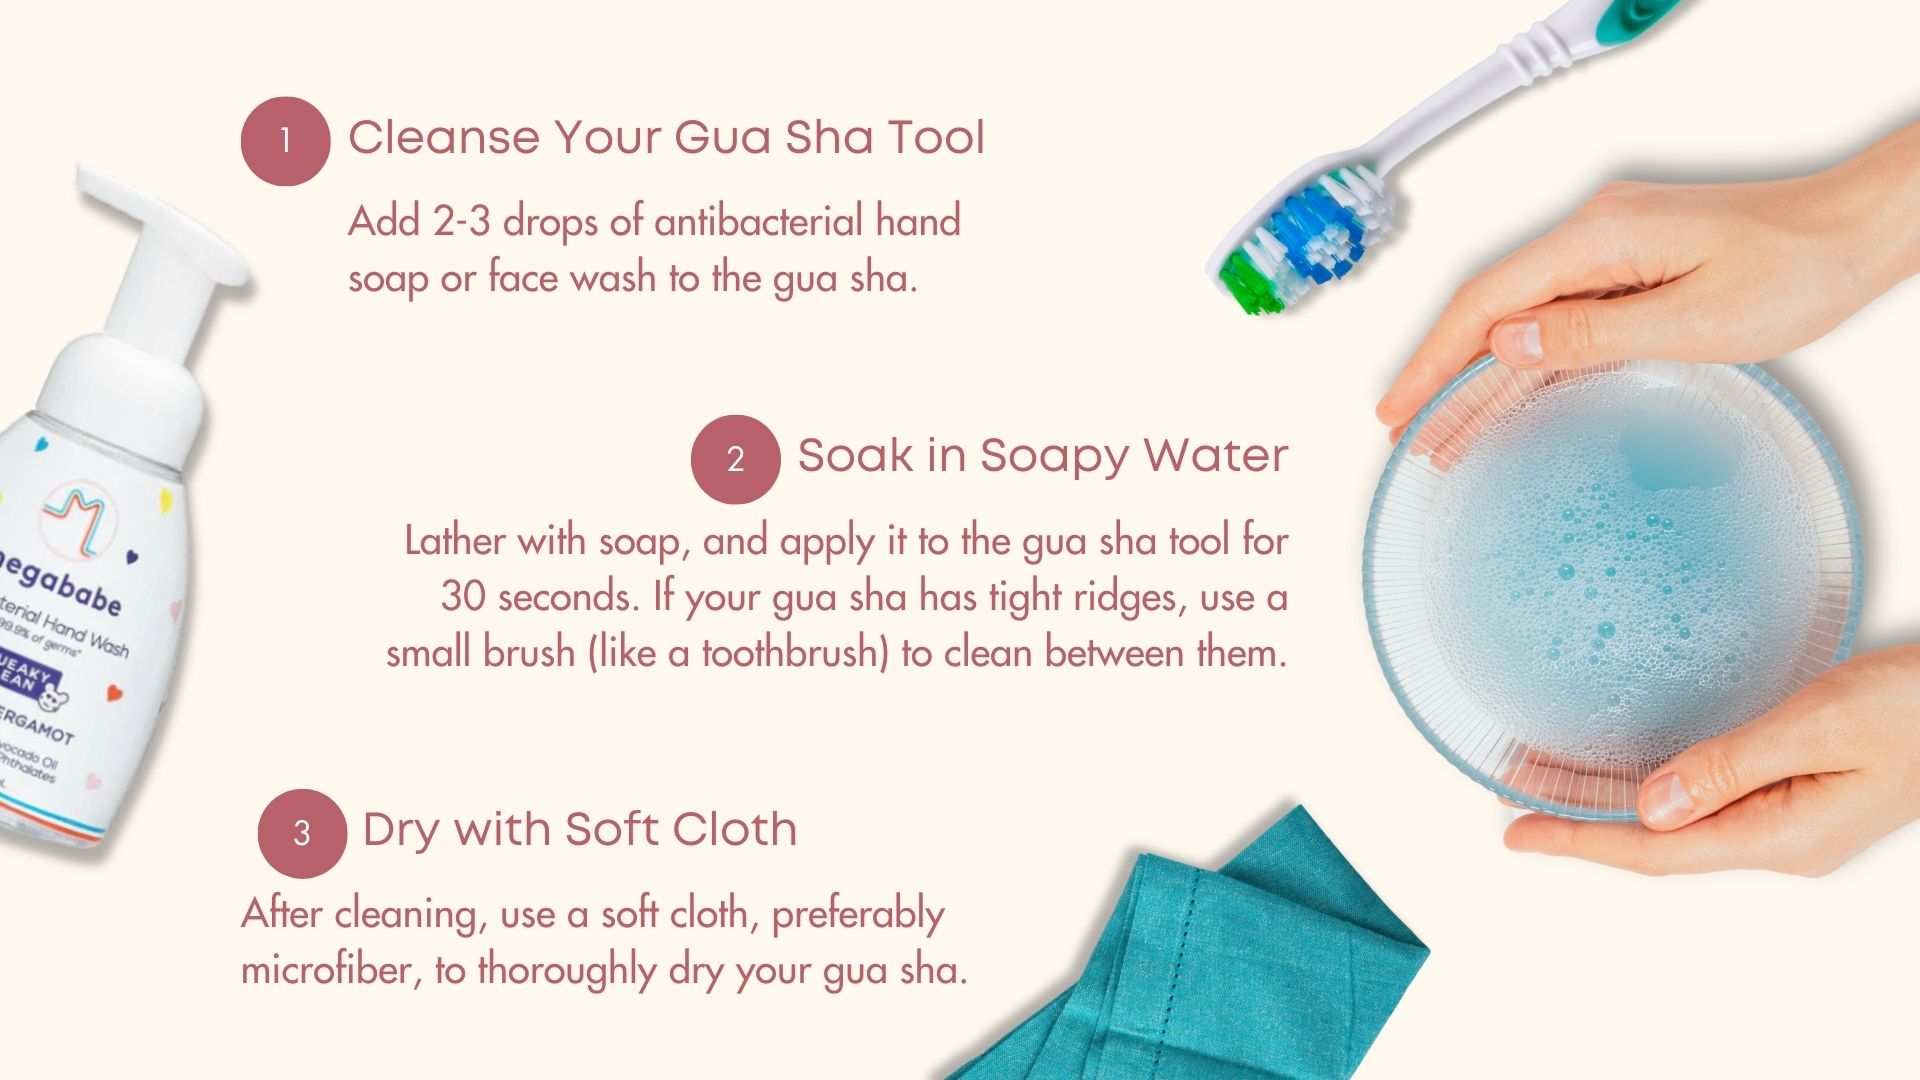 How to Clean a Gua Sha Step By Step Procedure